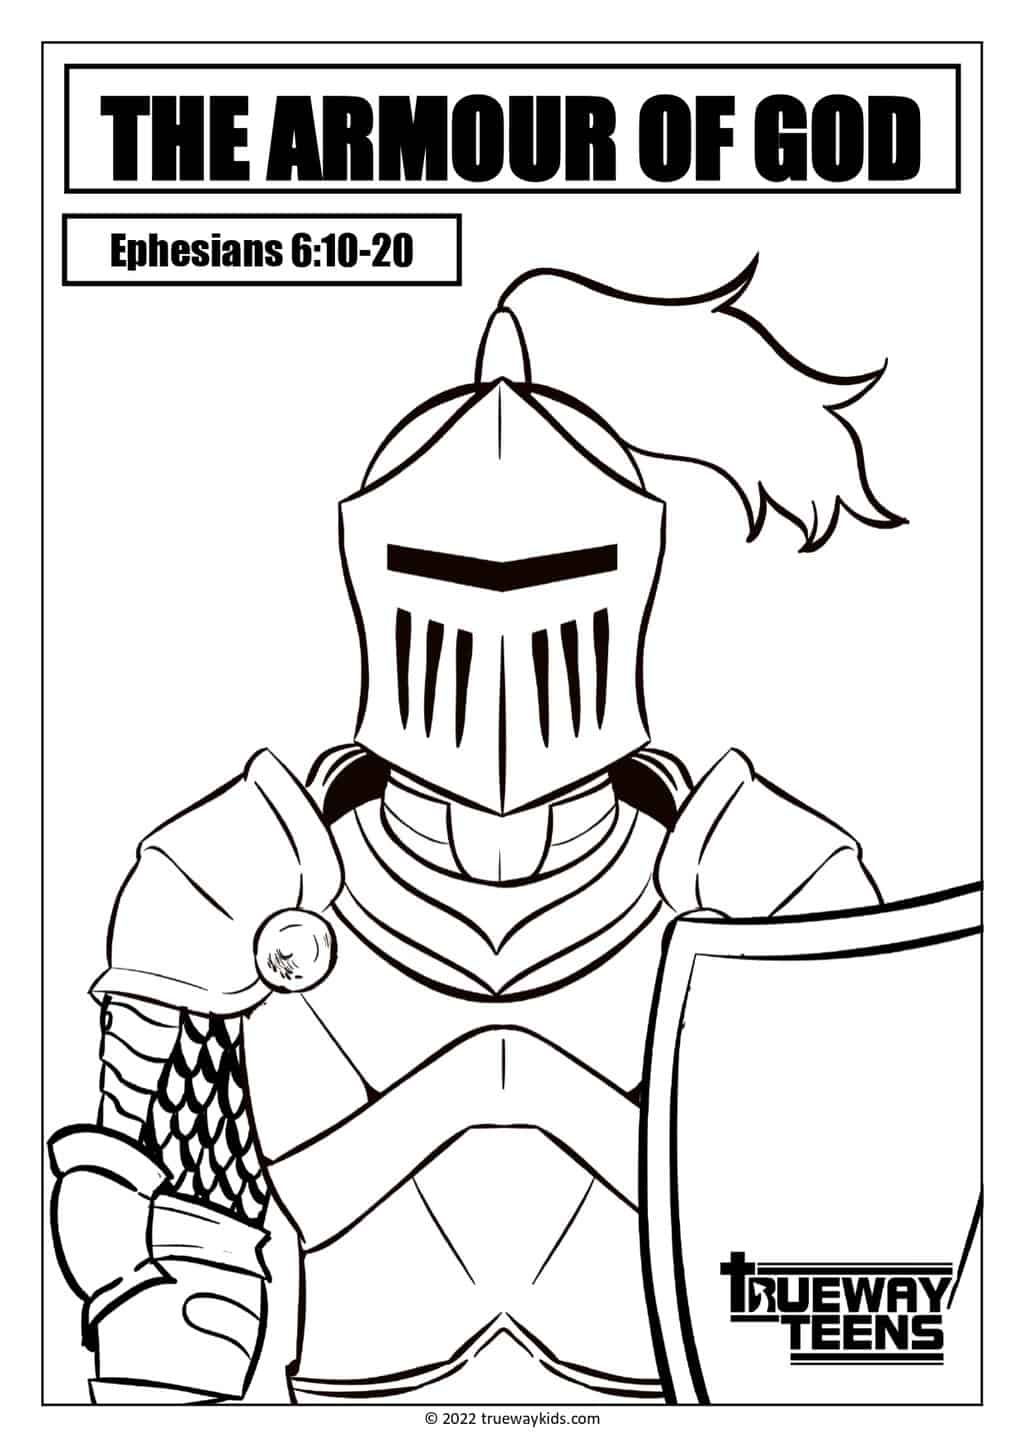 THE ARMOUR OF GOD (Bible lesson for teens) - Trueway Kids